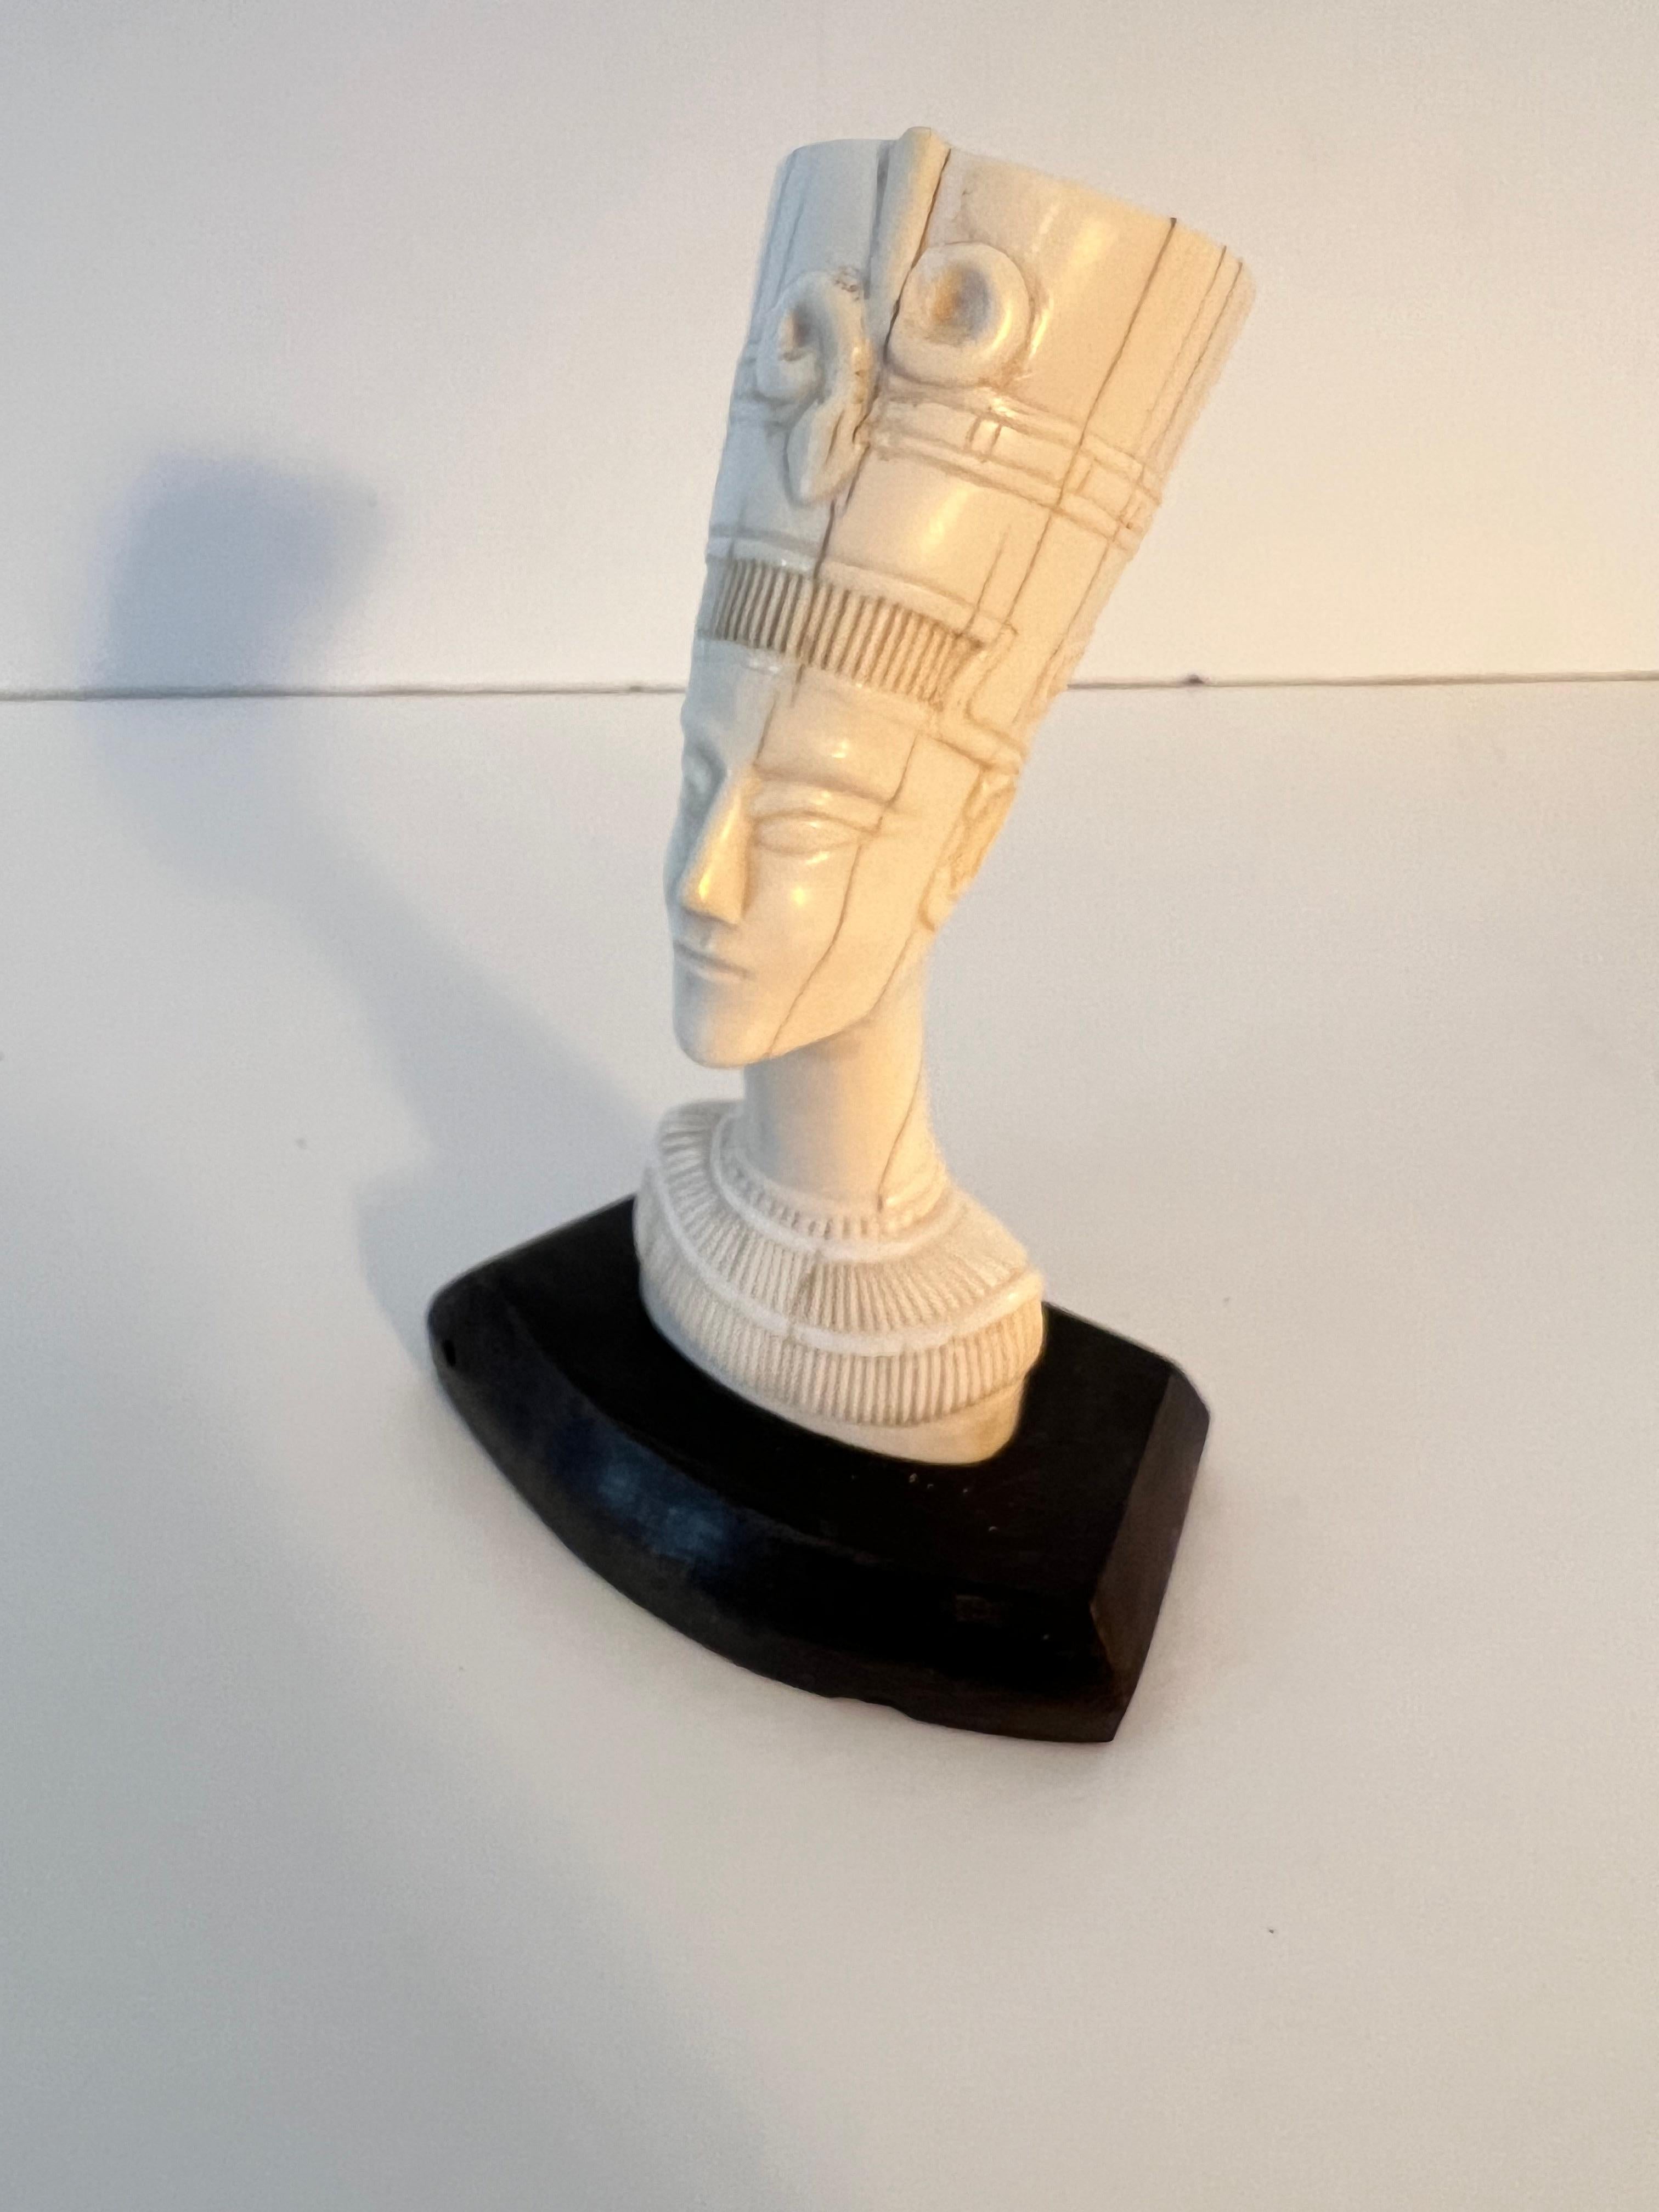 A Wonderful Carved Nefertiti Head on Base. The piece is carved bone and finely detailed.

A compliment to many spaces - on a shelf, or as a paper weight on a desk or work station. A truly spectacular piece.